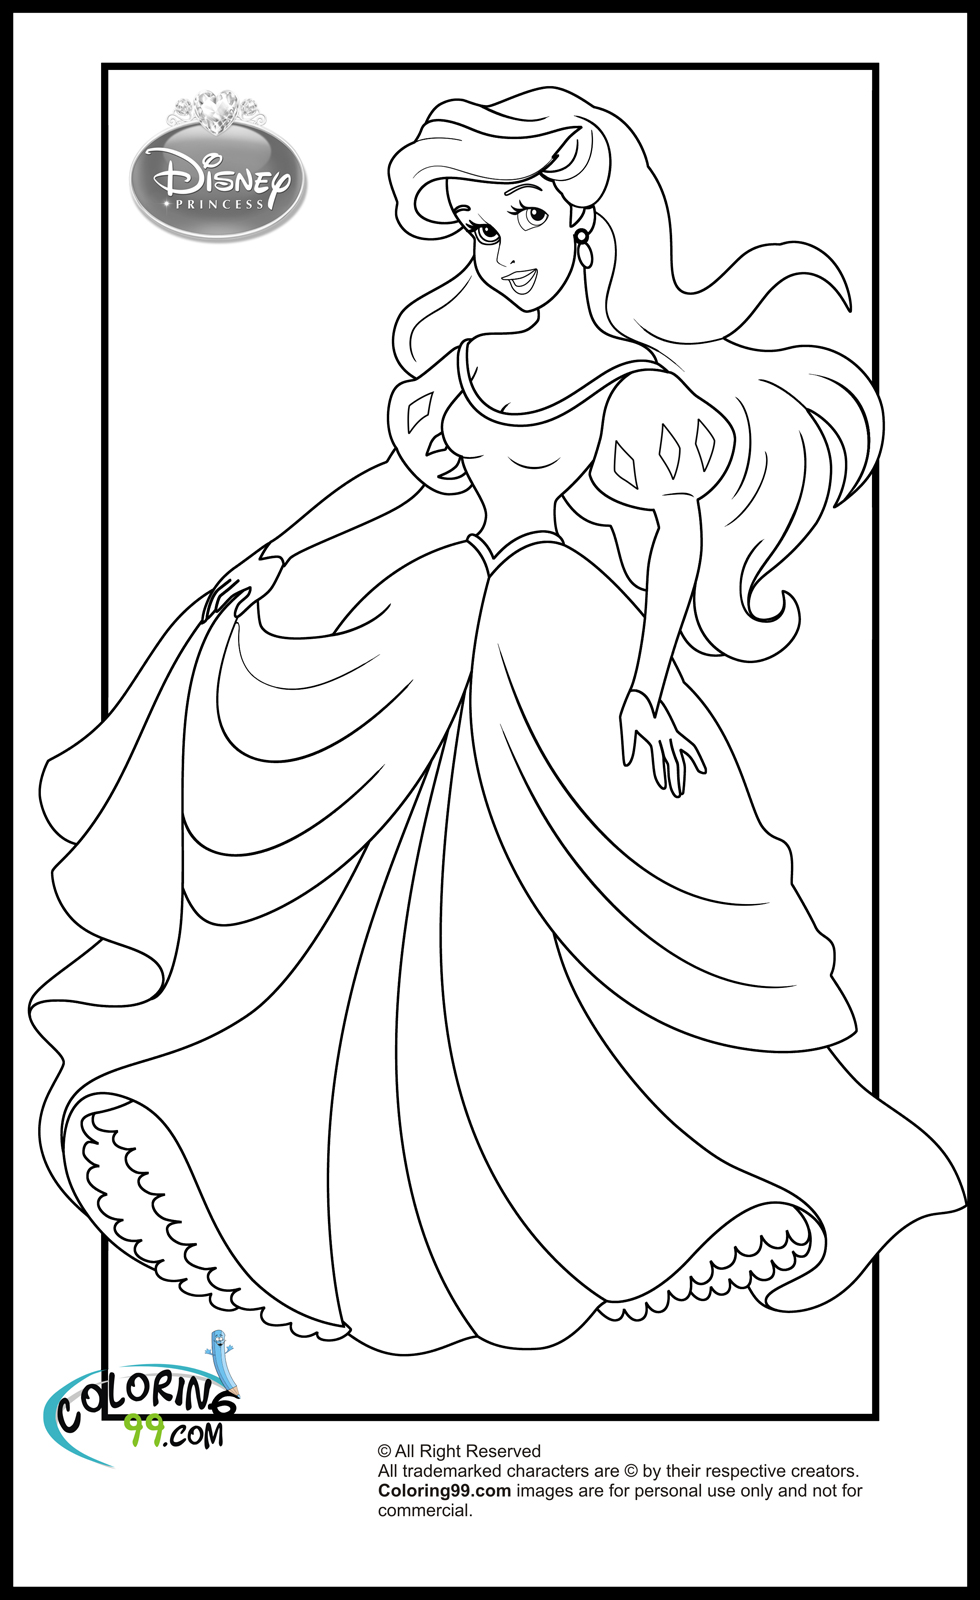 Download Coloring Pages Of Disney Princess - 146+ File for DIY T-shirt, Mug, Decoration and more for Cricut, Silhouette and Other Machine